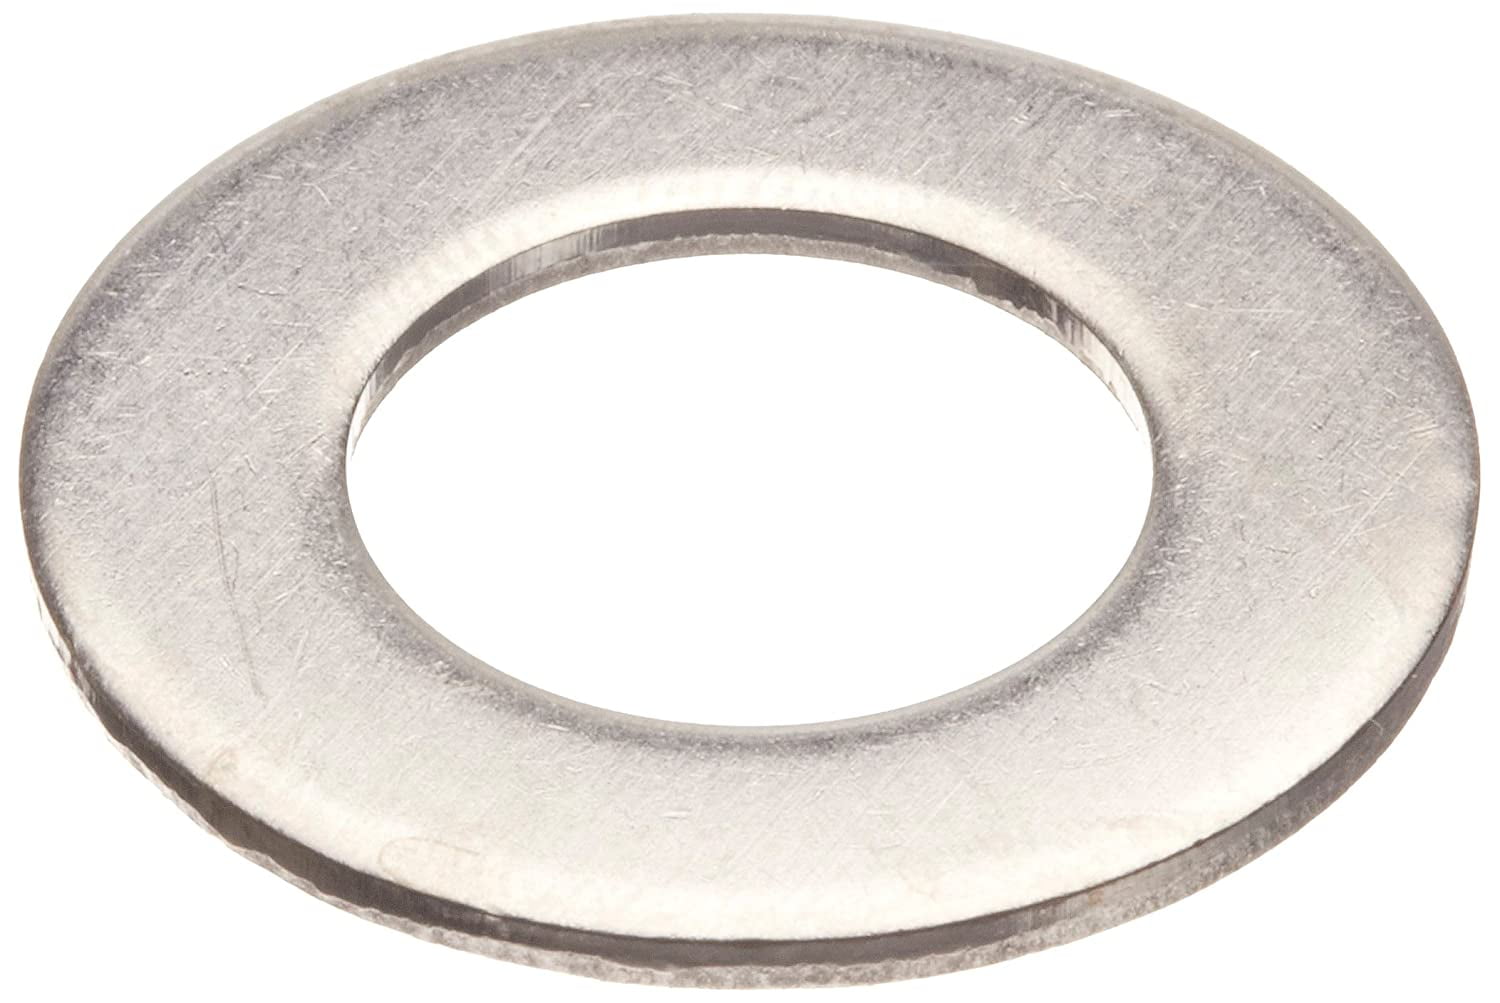 7/16 Lock Washers Steel Zinc Plated 500 count box 